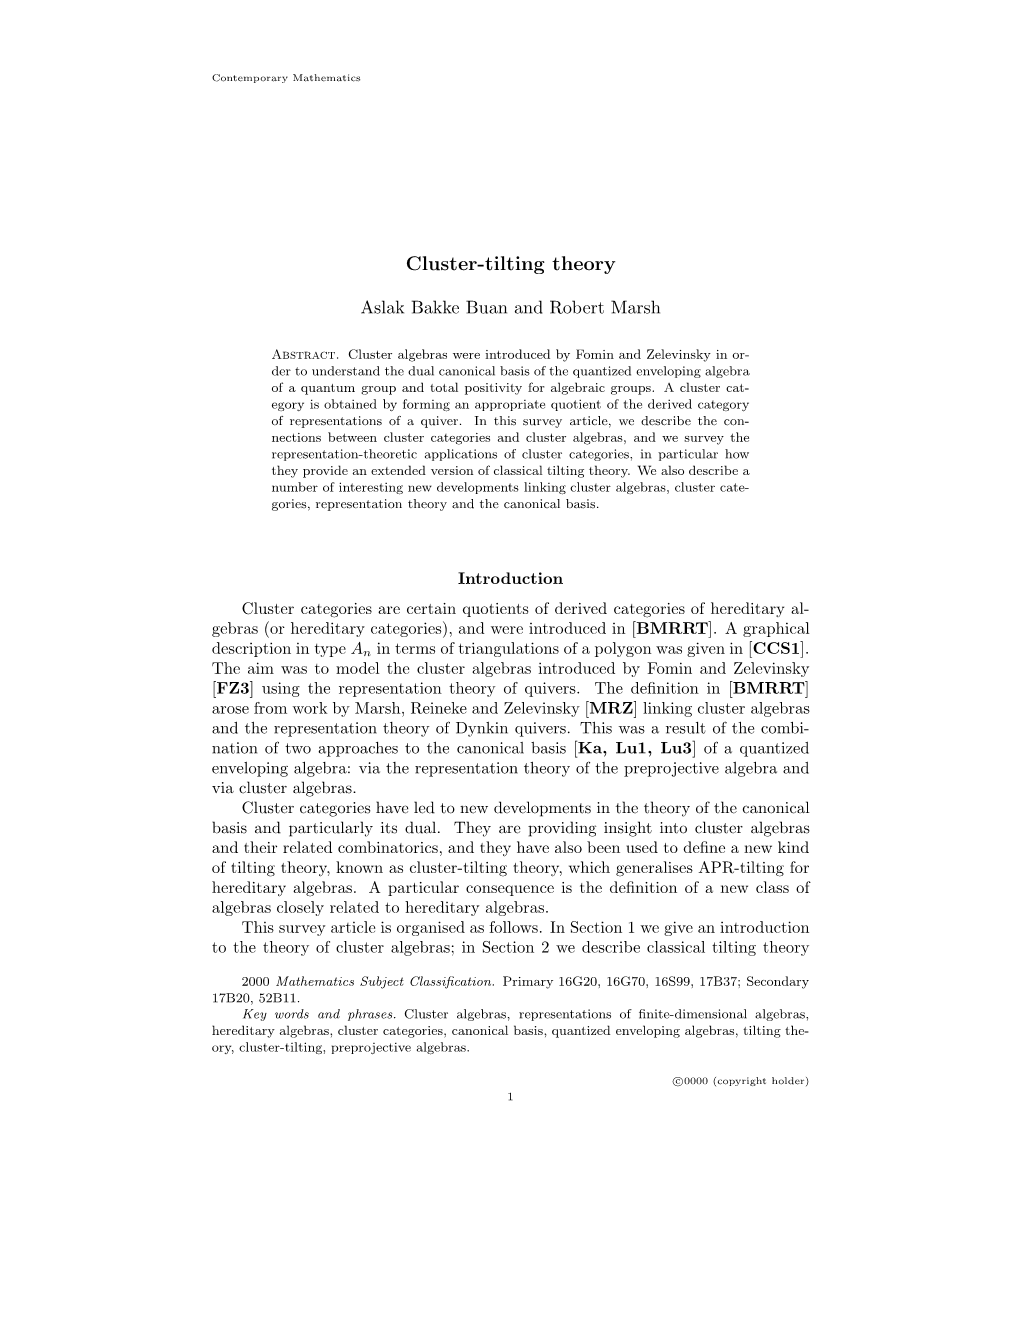 Cluster-Tilting Theory